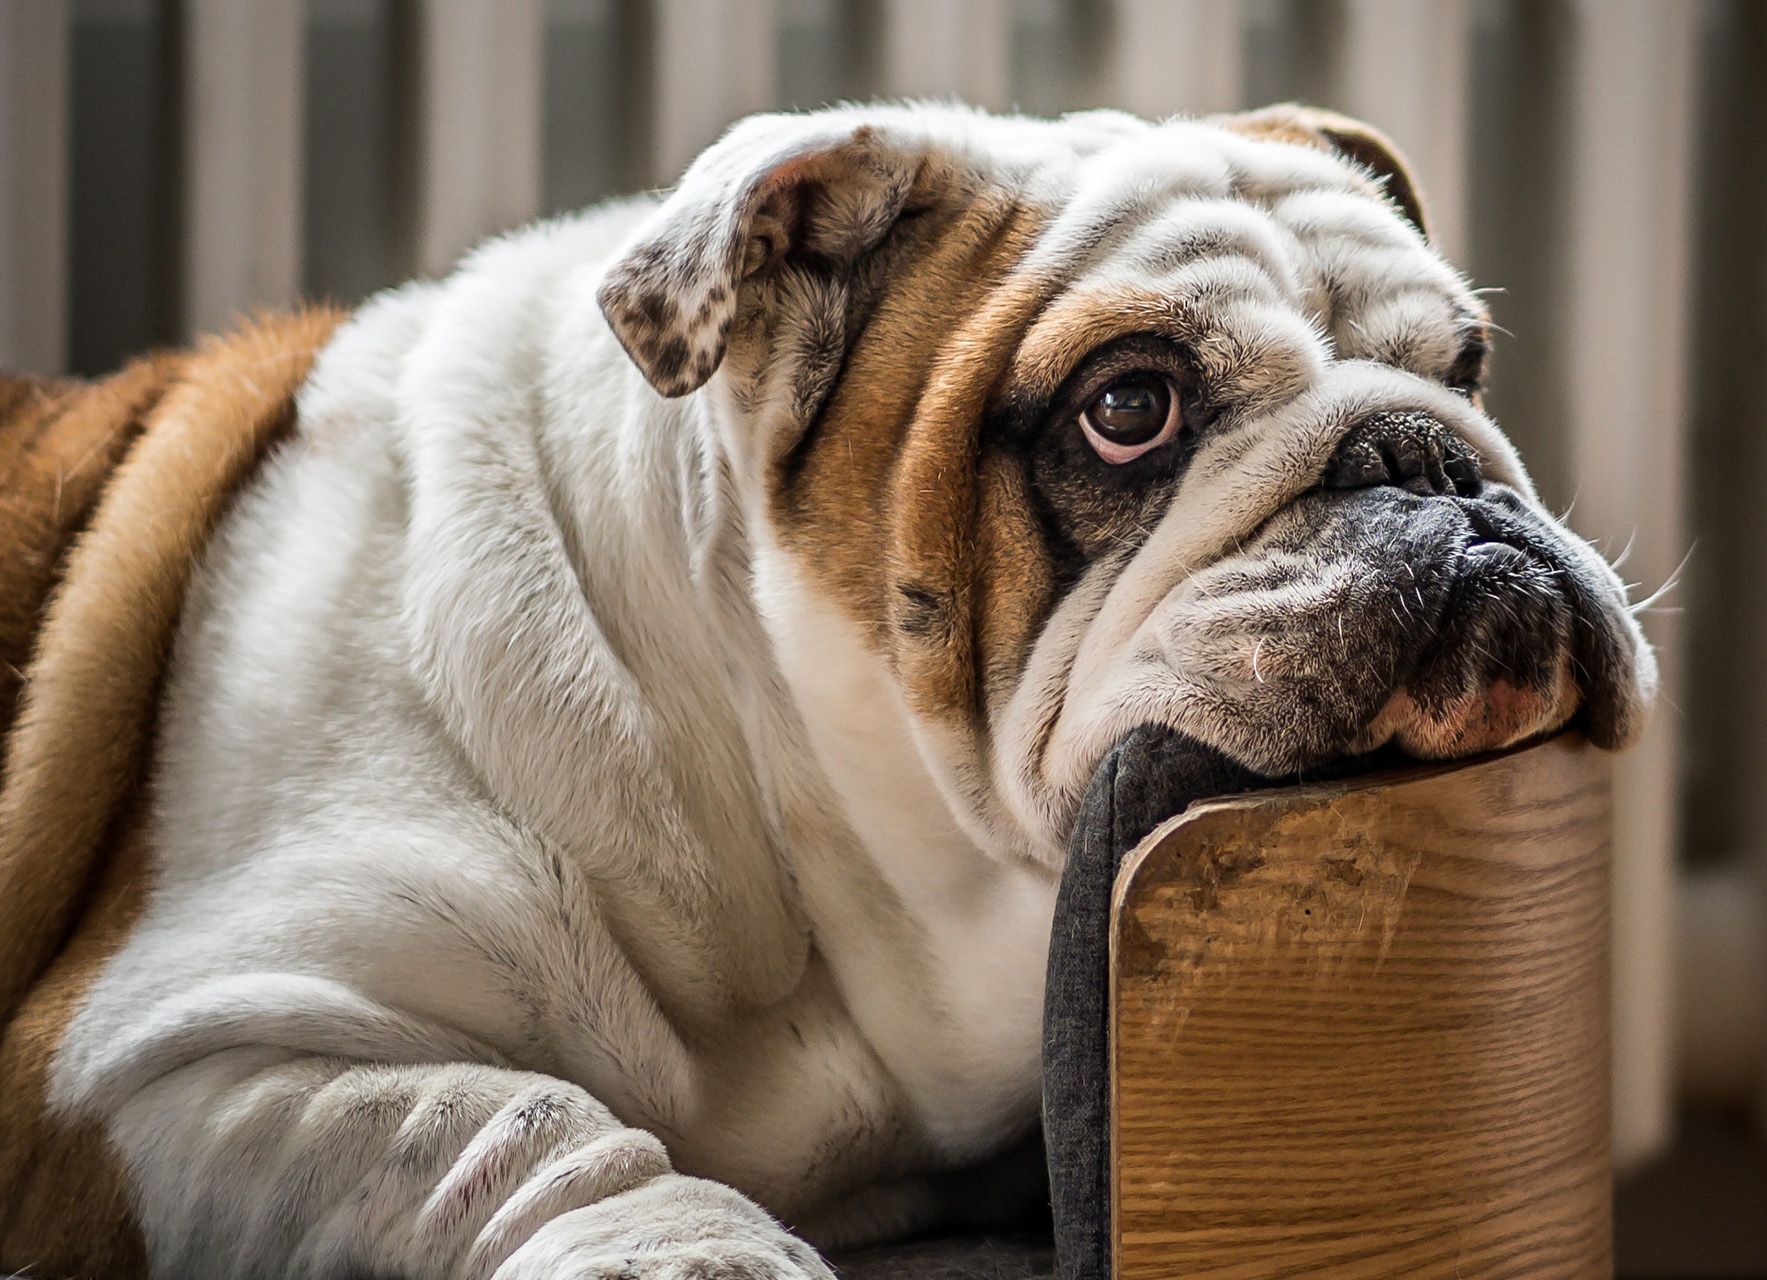 Natural Ways to Prevent Vomiting and Upset Stomach in English Bulldogs